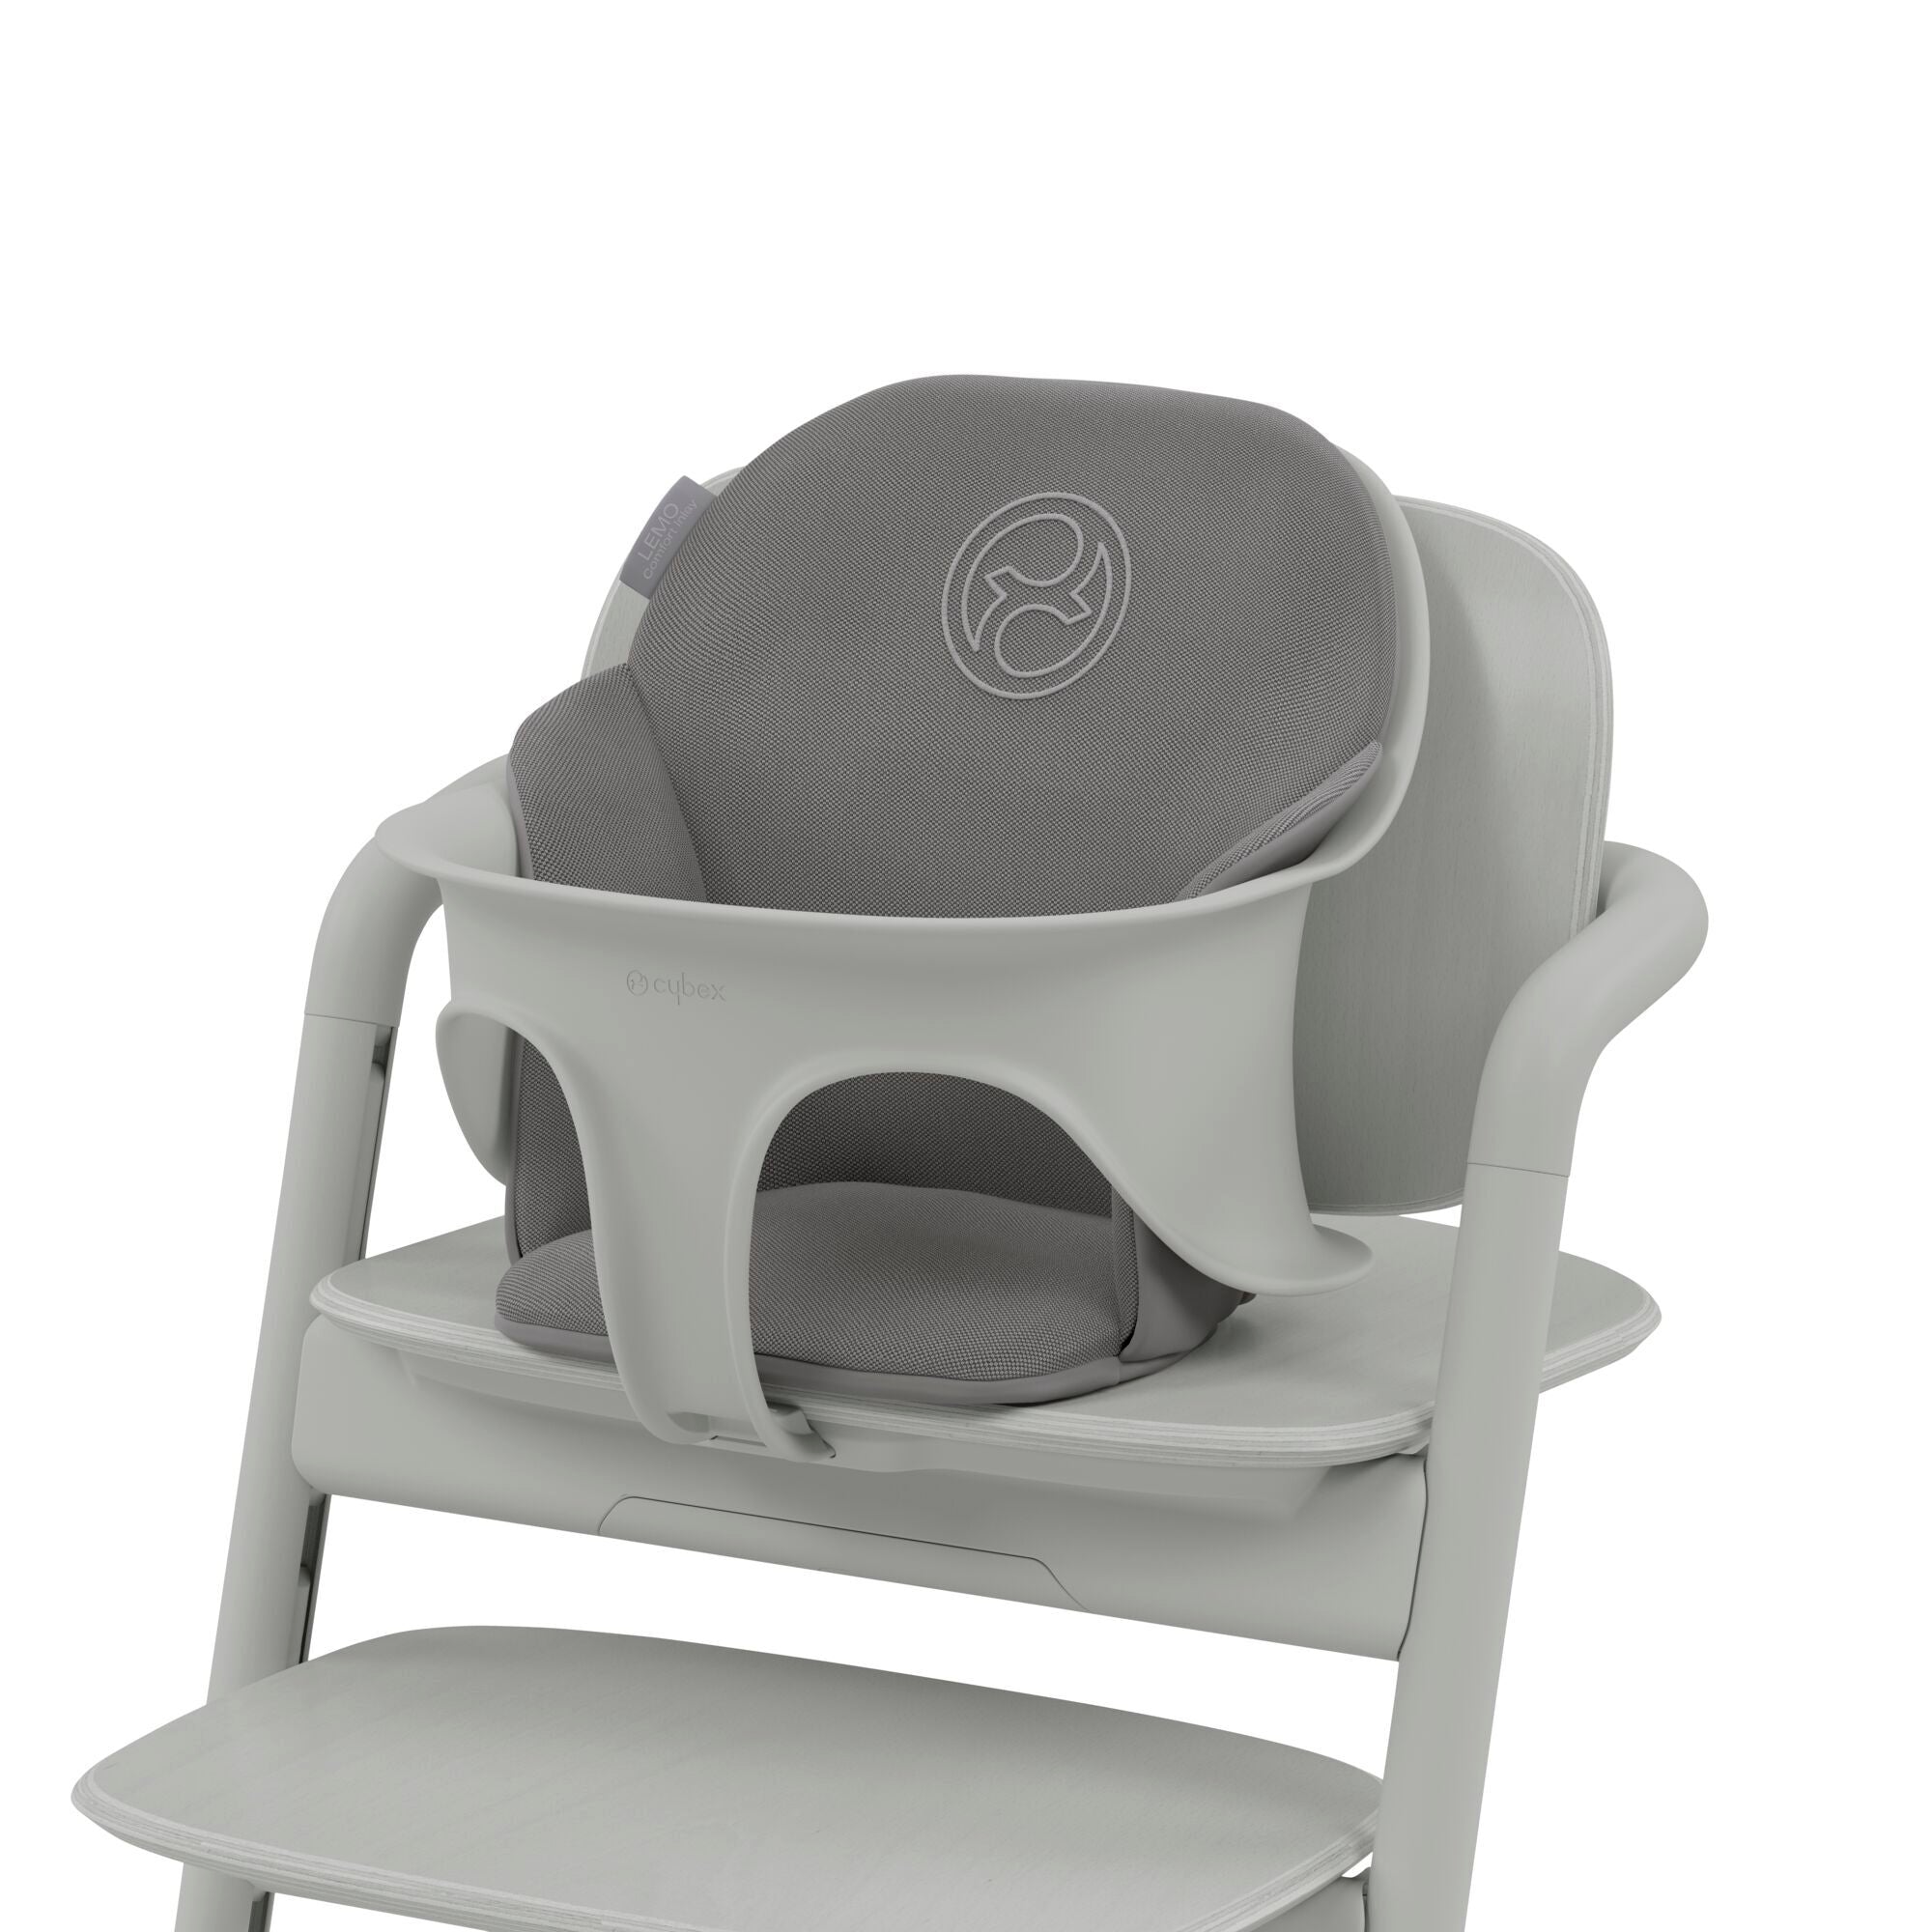 Cybex Comfort Inlay for Lemo 2 High Chair - ANB Baby -4063846225248Beige